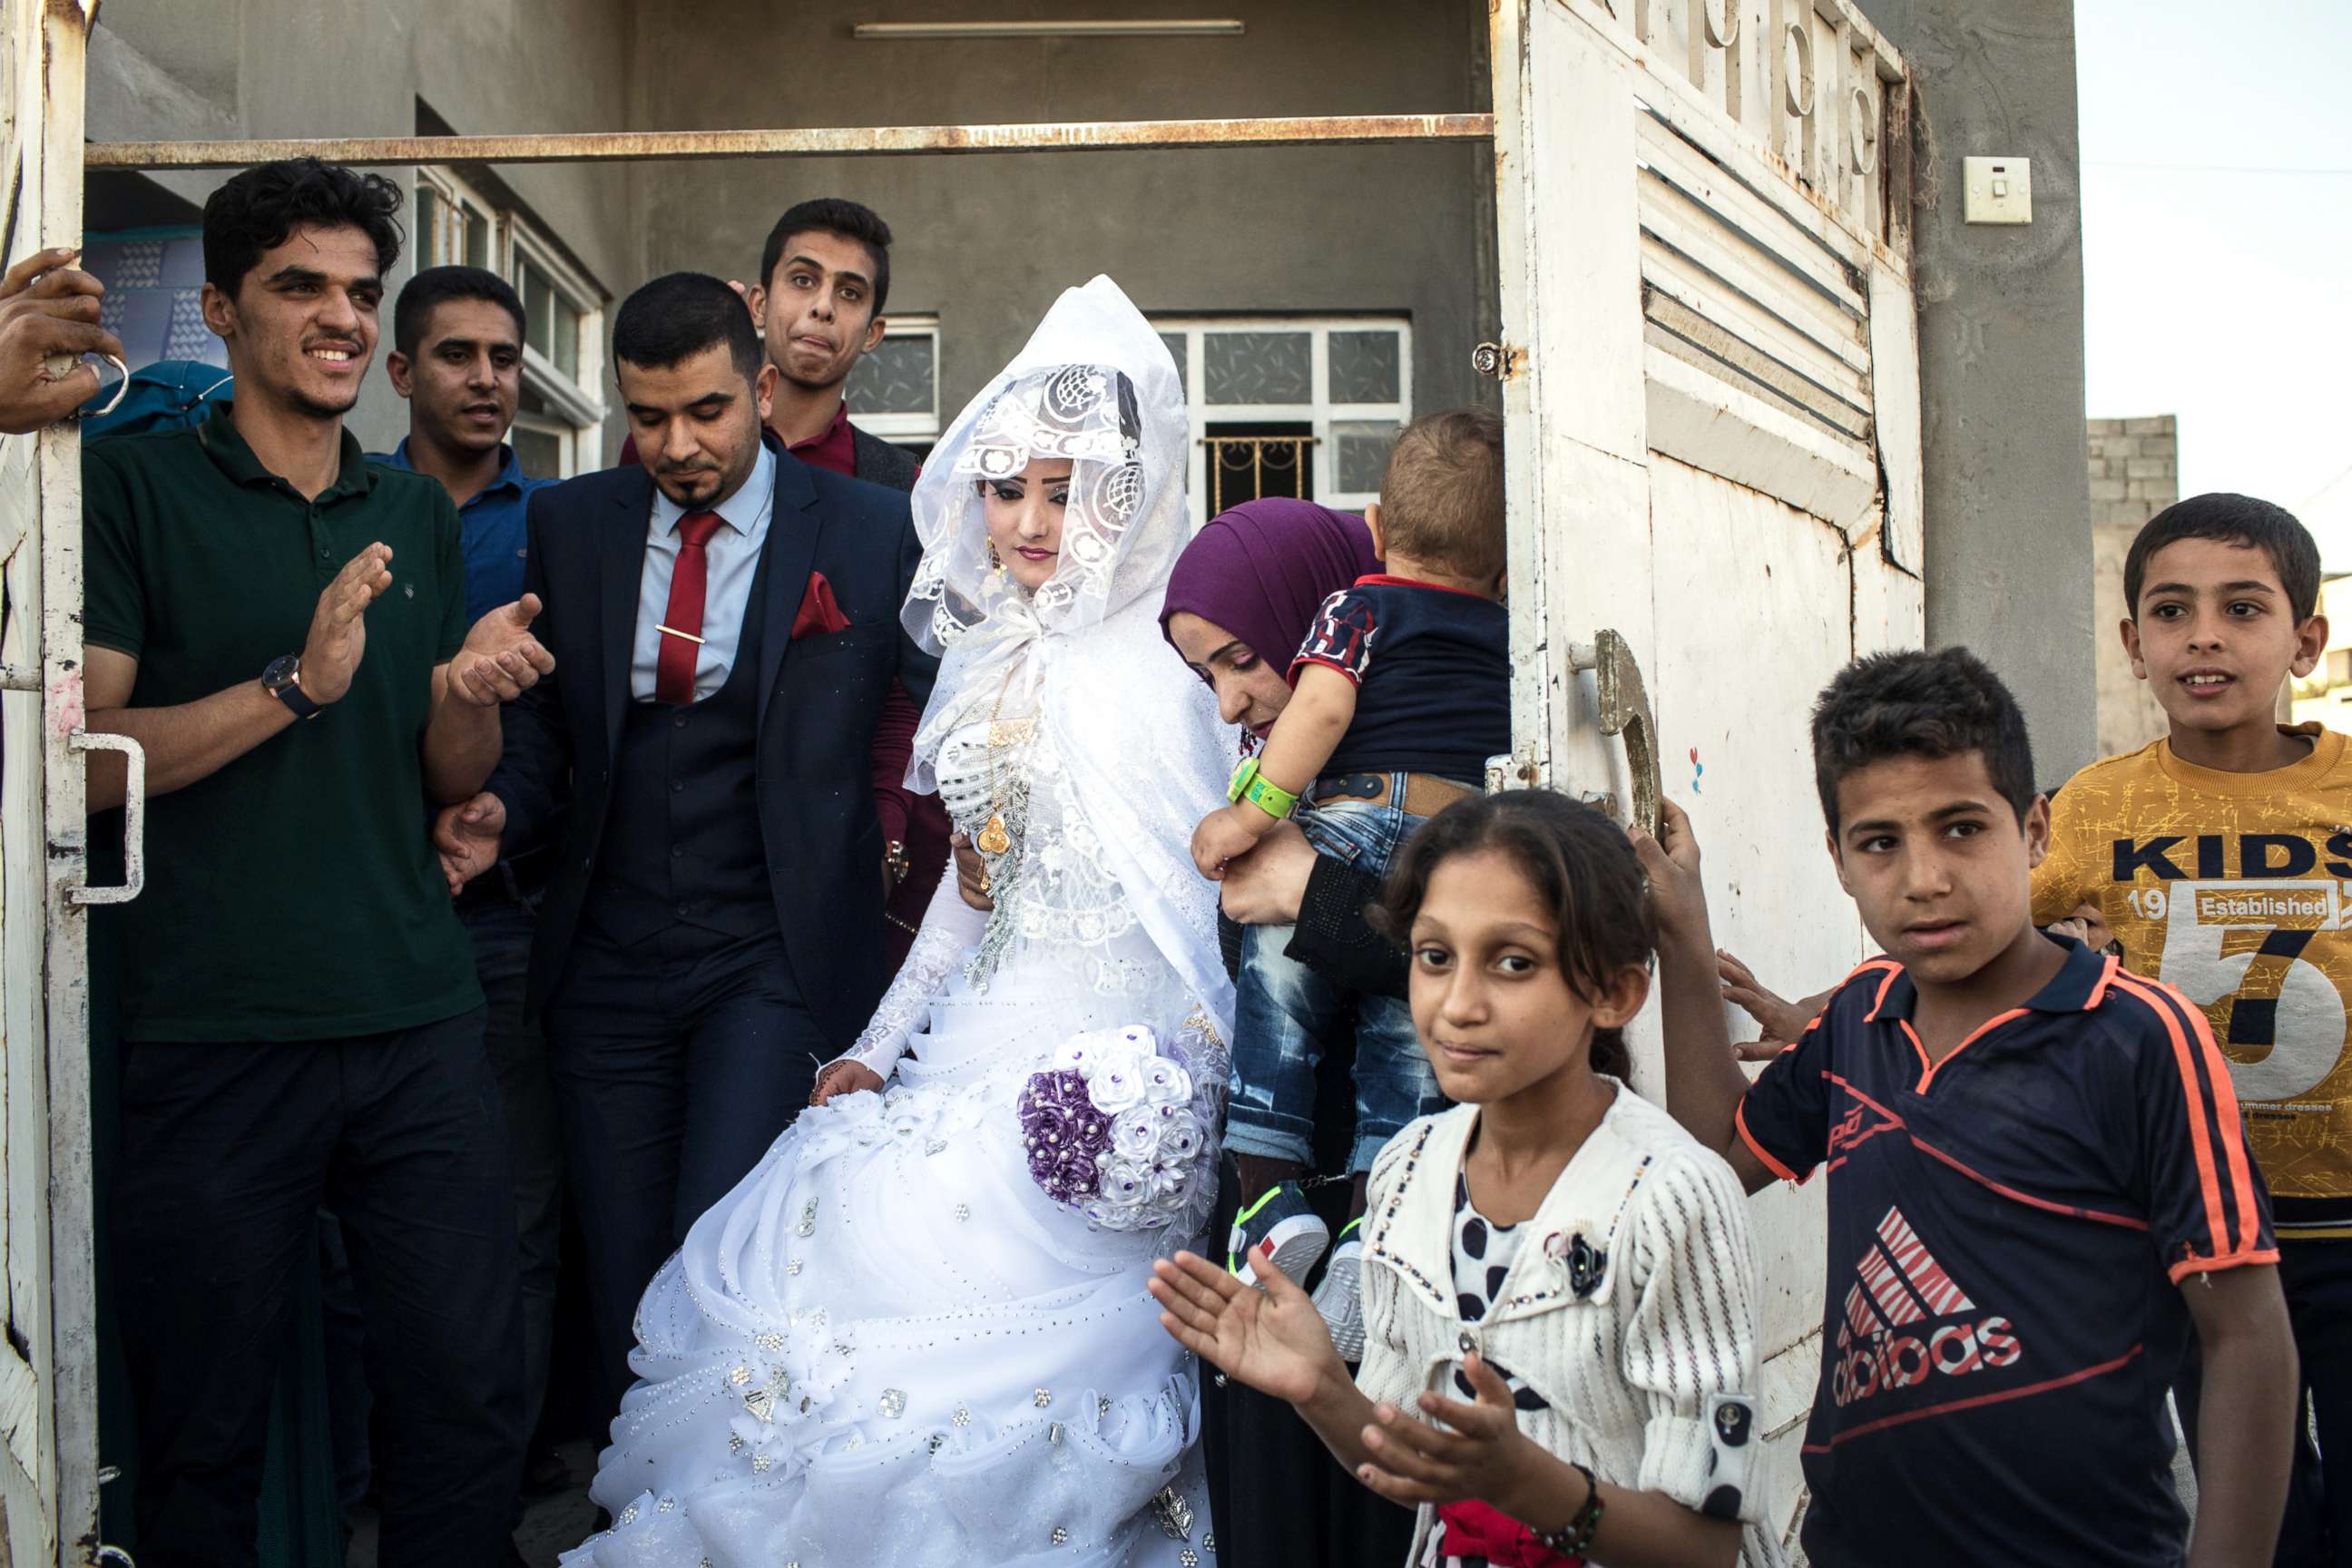 PHOTO: Family members watch on as a bride and groom leave their house to be married in West Mosul on Nov. 3, 2017.